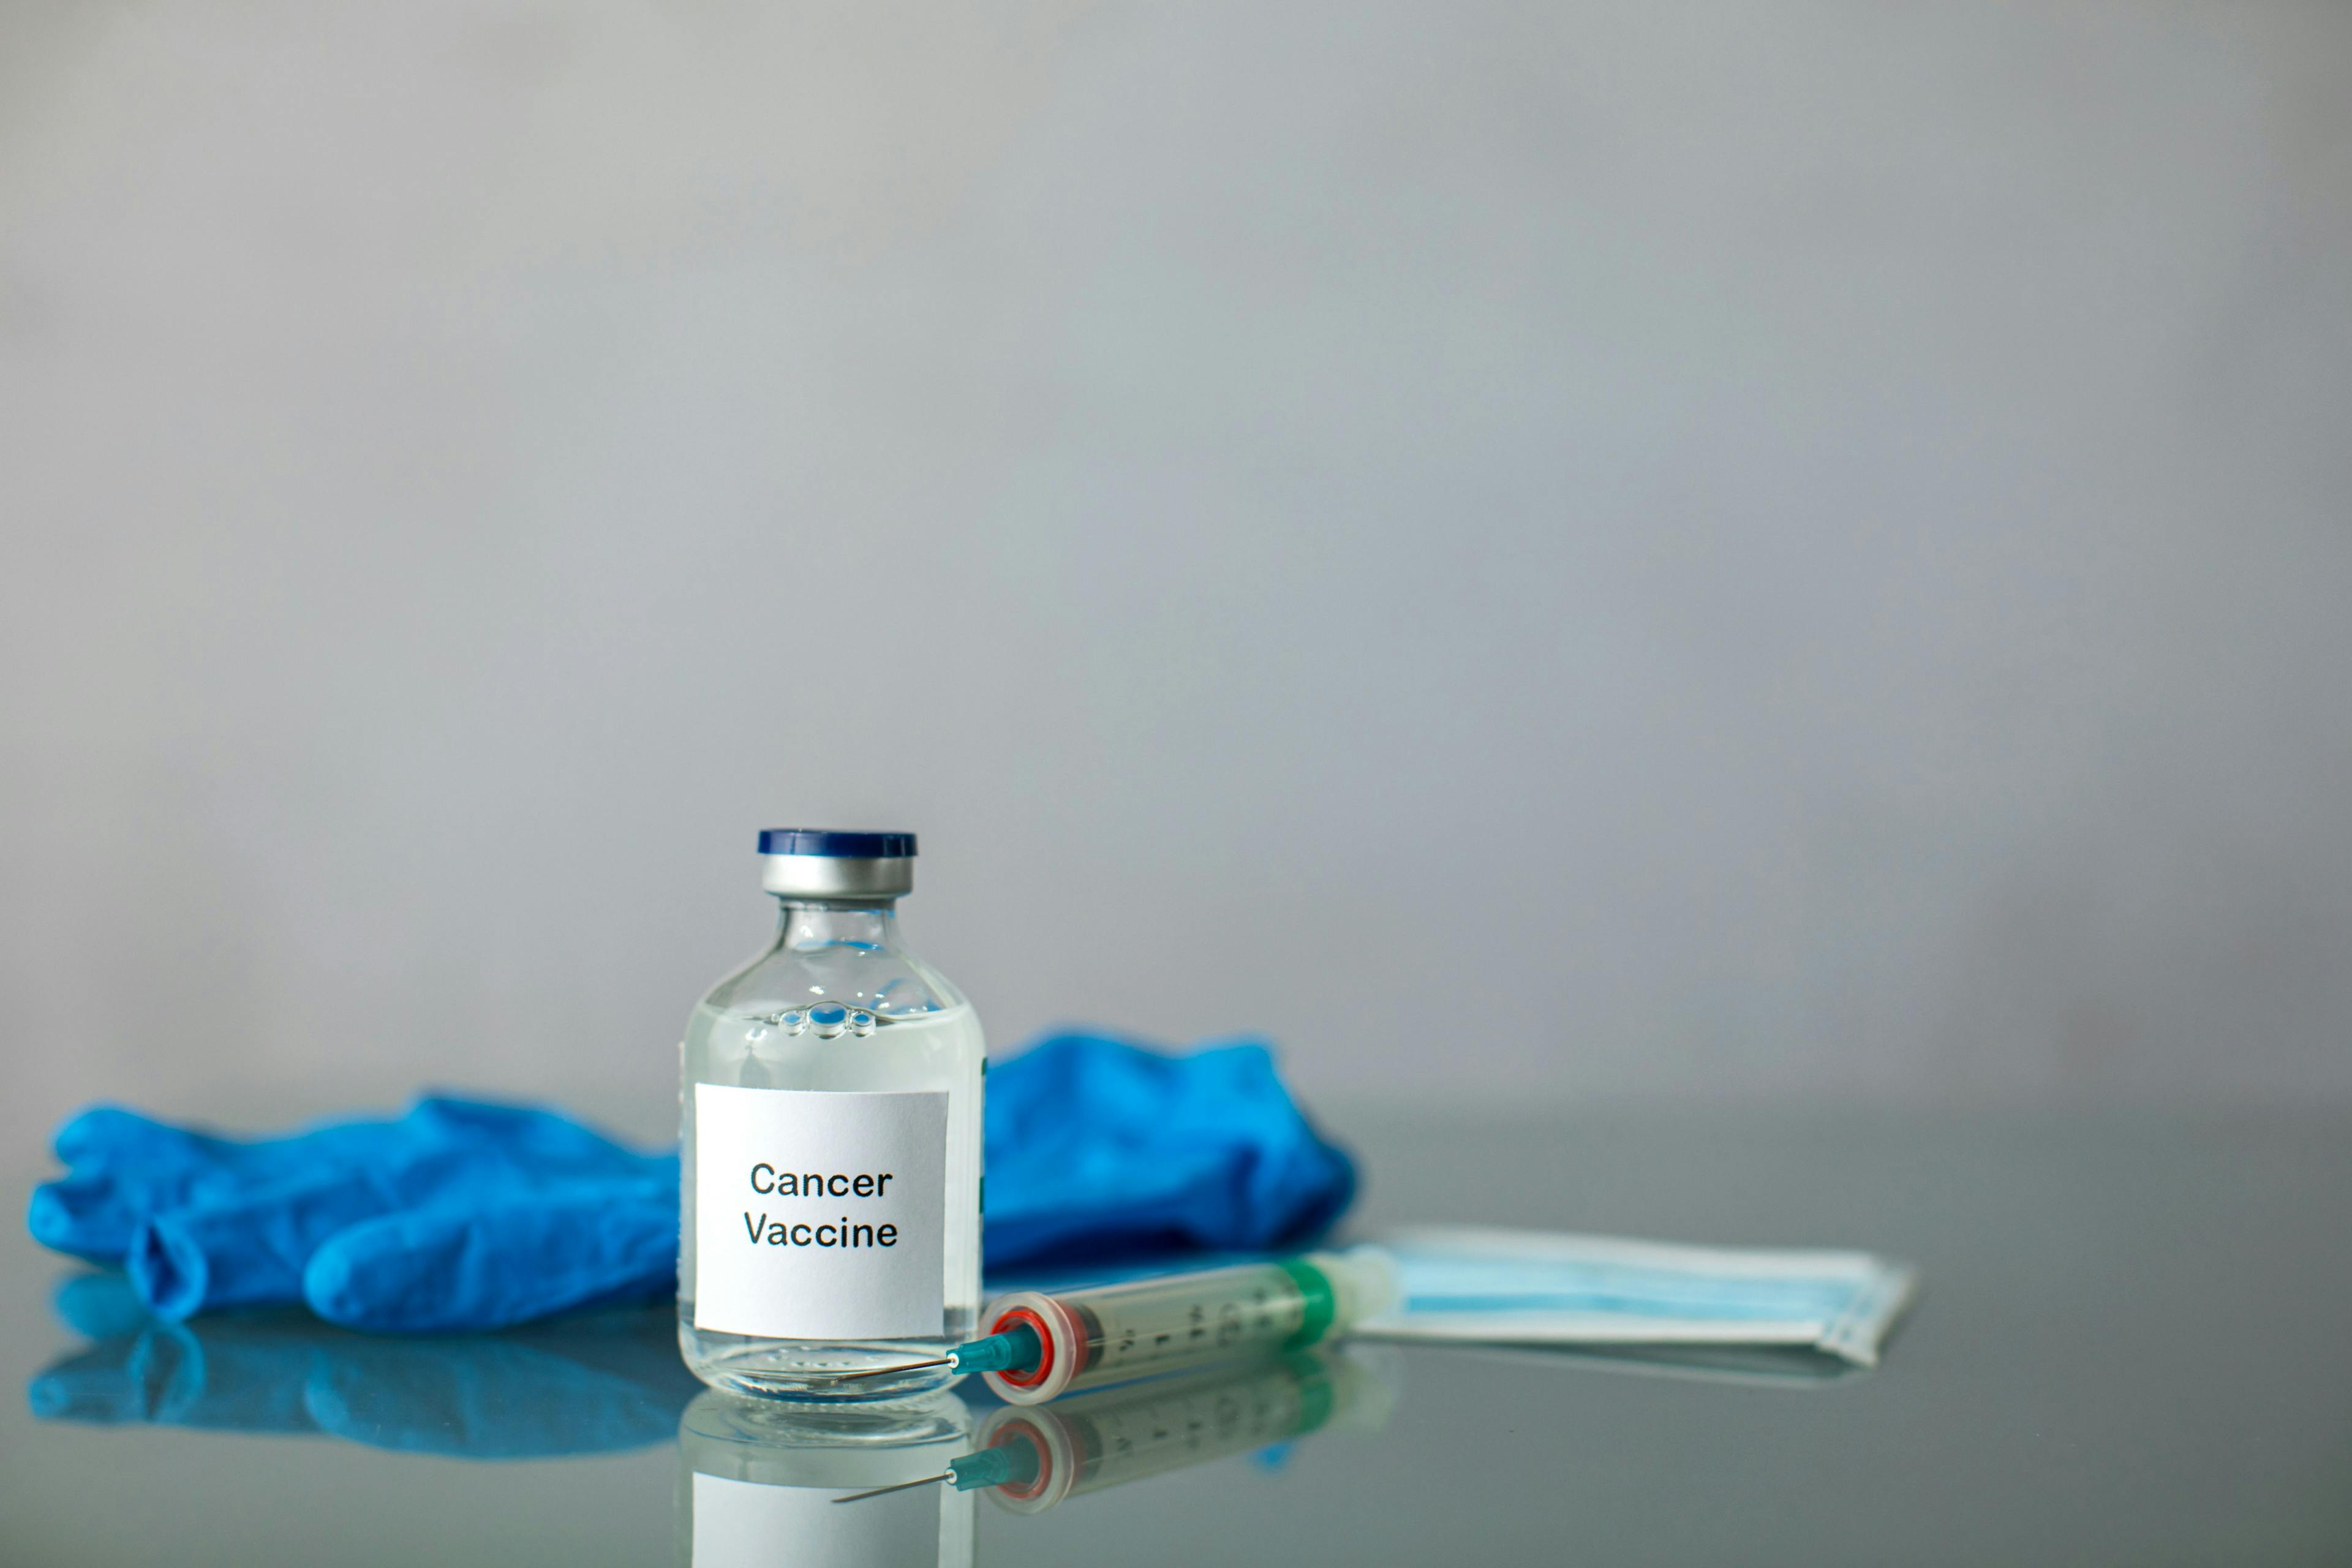 vial of cancer vaccine | Image credit © Urusal Page  adobe.stock.com